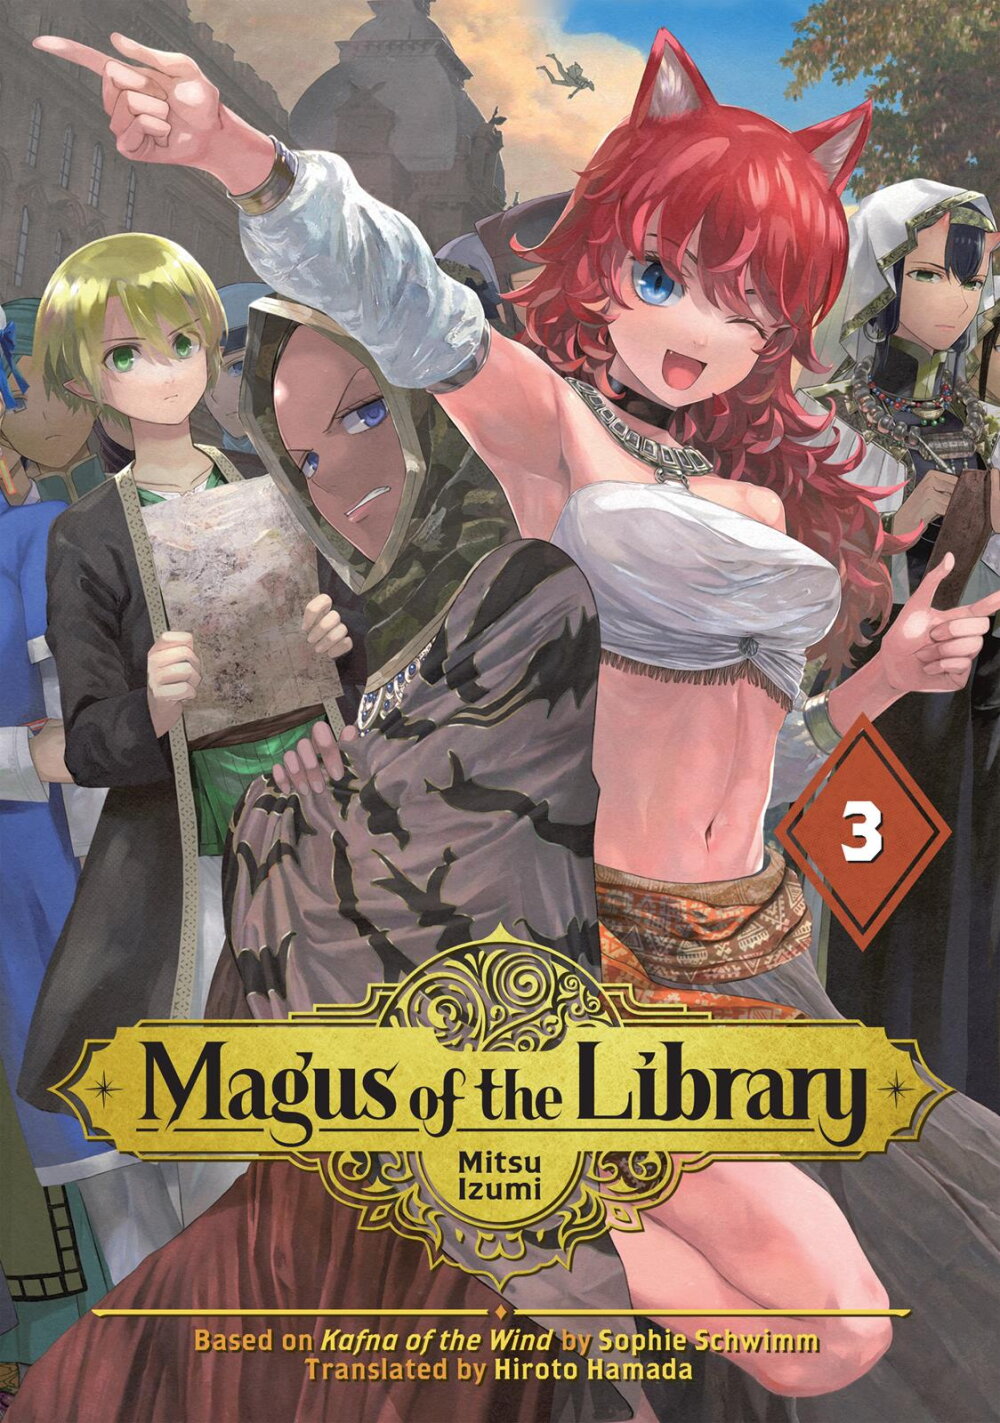 Magus of the Library 10 01